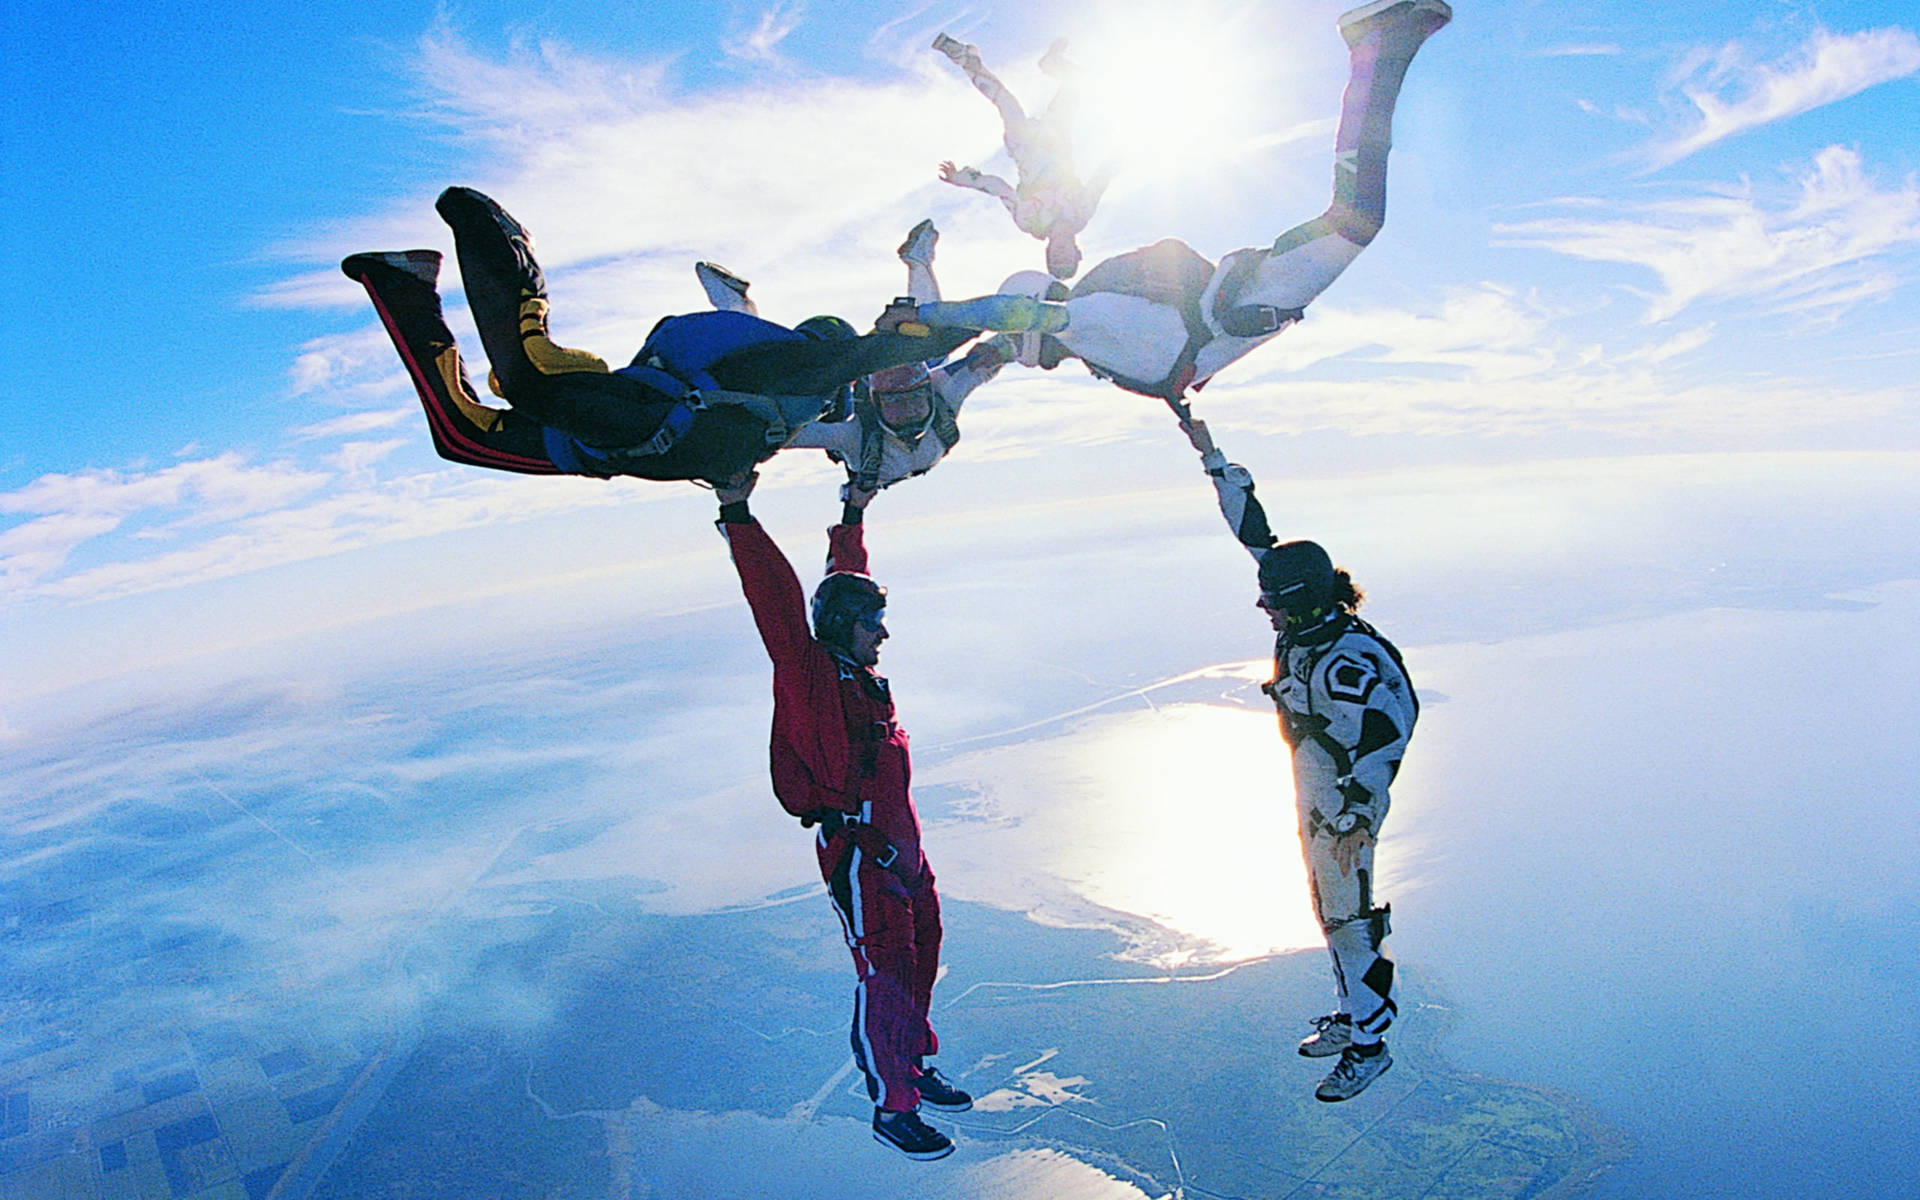 Extreme Sports Formation Skydiving